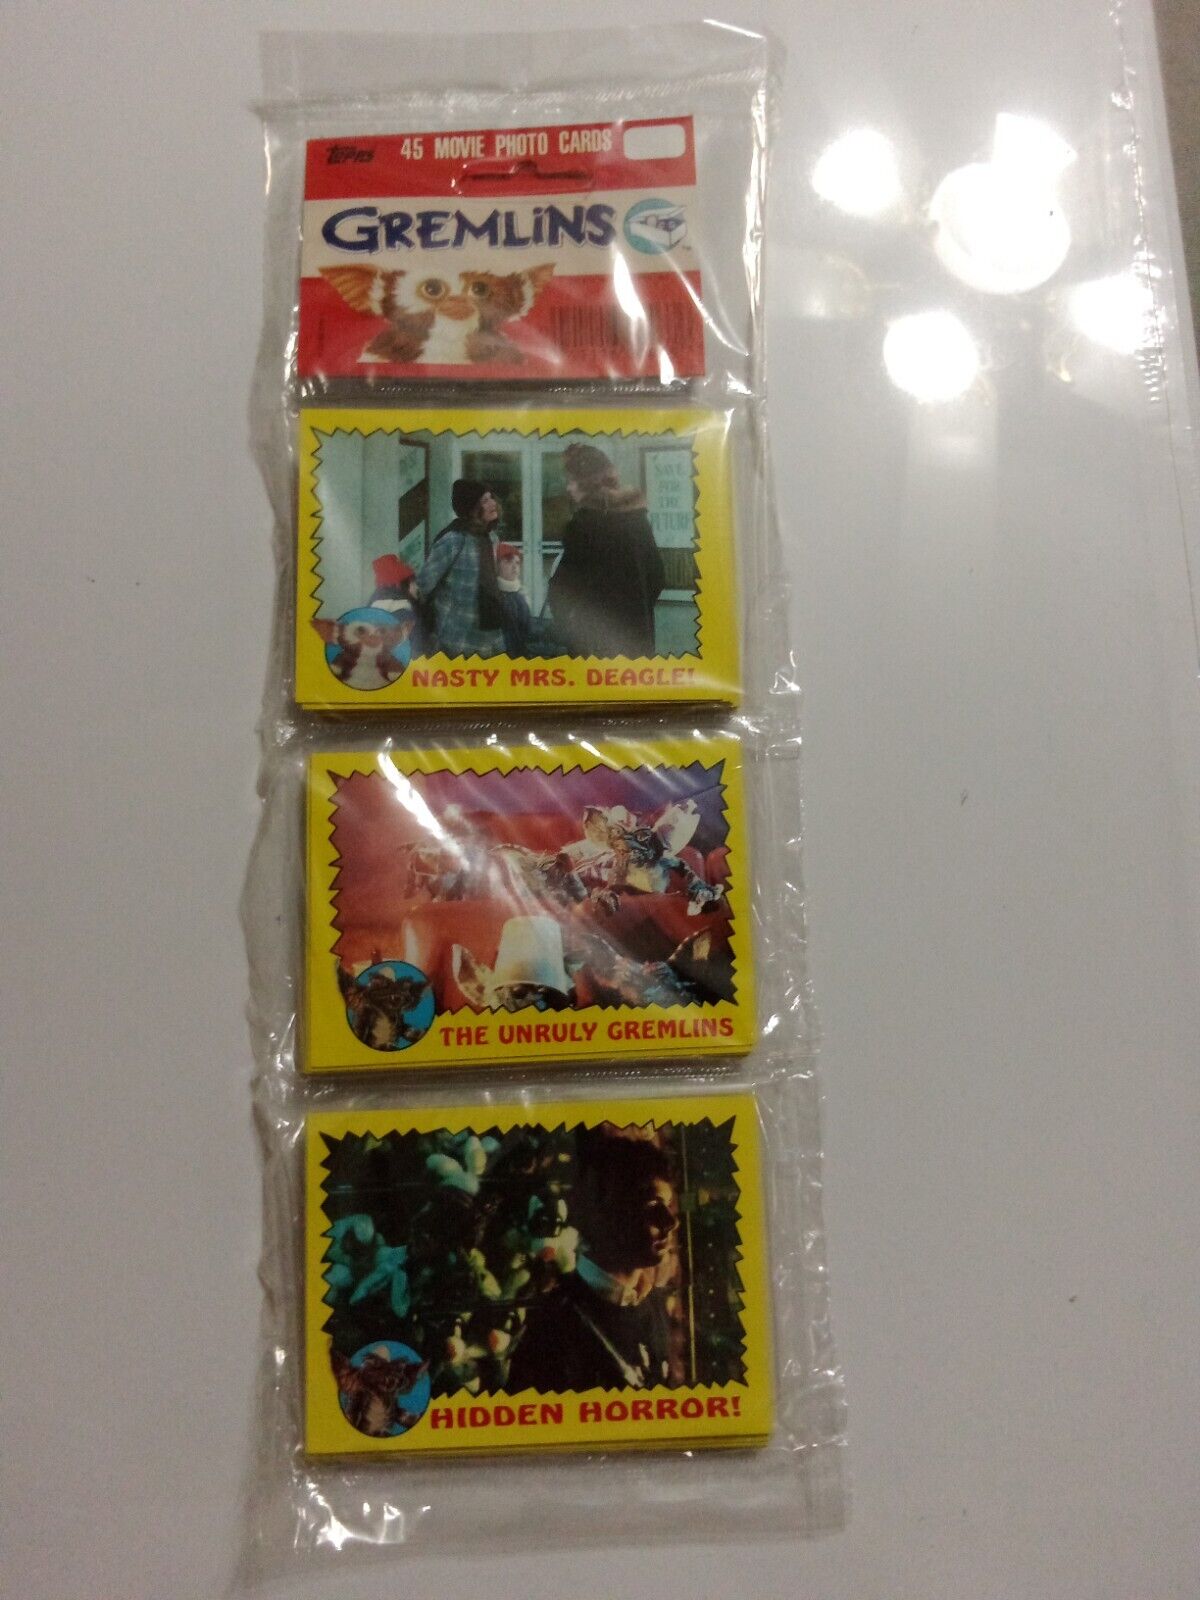 1984 Topps Gremlins 45 Movie Photo Cards